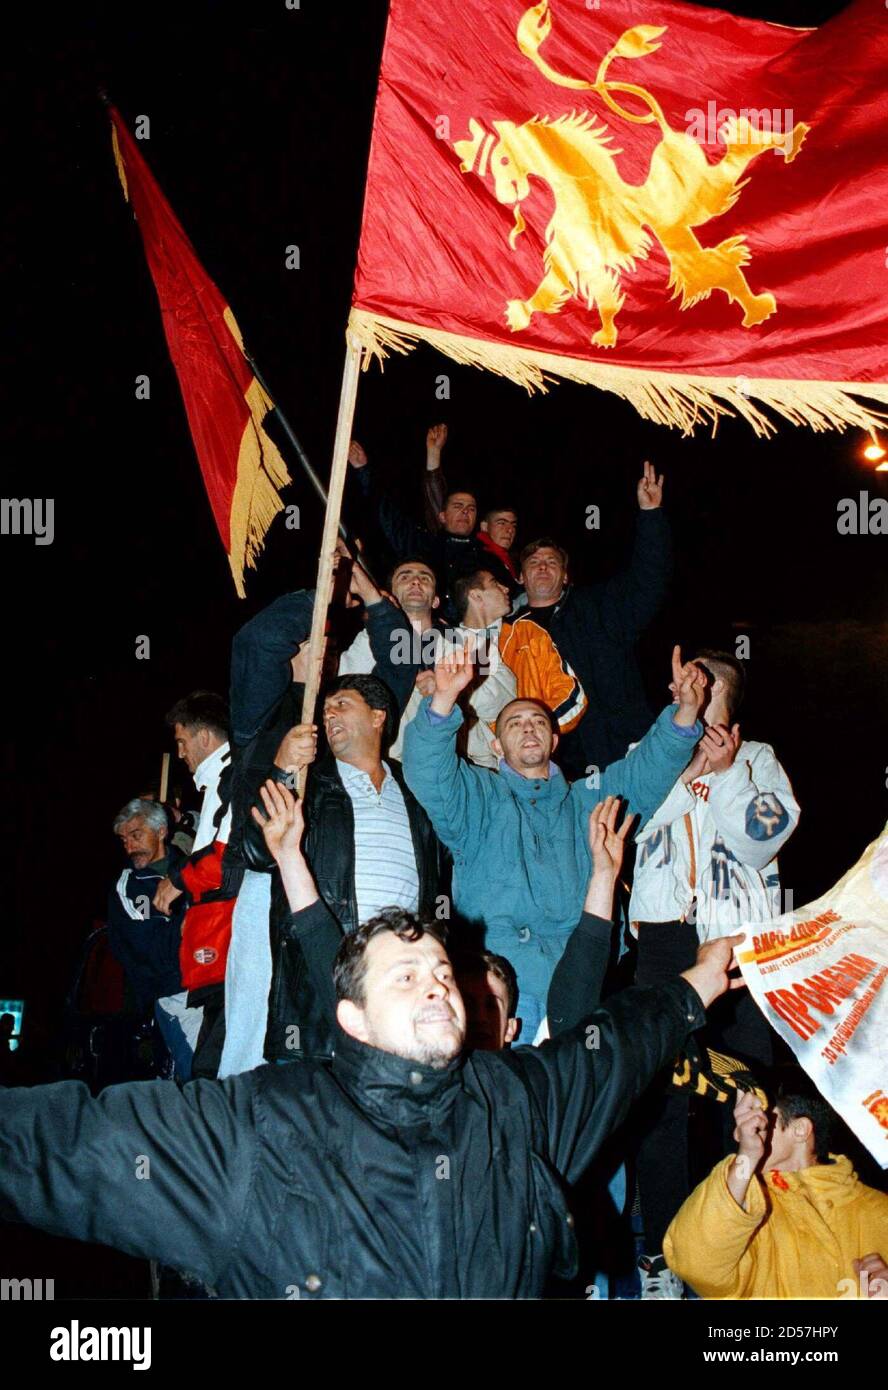 Supporters of Macedonia's main opposition Democratic Party for Macedonian National Unity (VMNO-DPNE) wave the party flag as they celebrate parliamentary election victory in Skopje early November 2. Macedonia's ruling socialists conceded defeat after the election, following decades of leftist government in the former Yugoslav republic. Ljubco Georgievski, president of the right-wing VMNO-DPNE party, said he and his pro-market partner the Democratic Alliance (DA) were on their way to form a government.  EV/WS Stock Photo